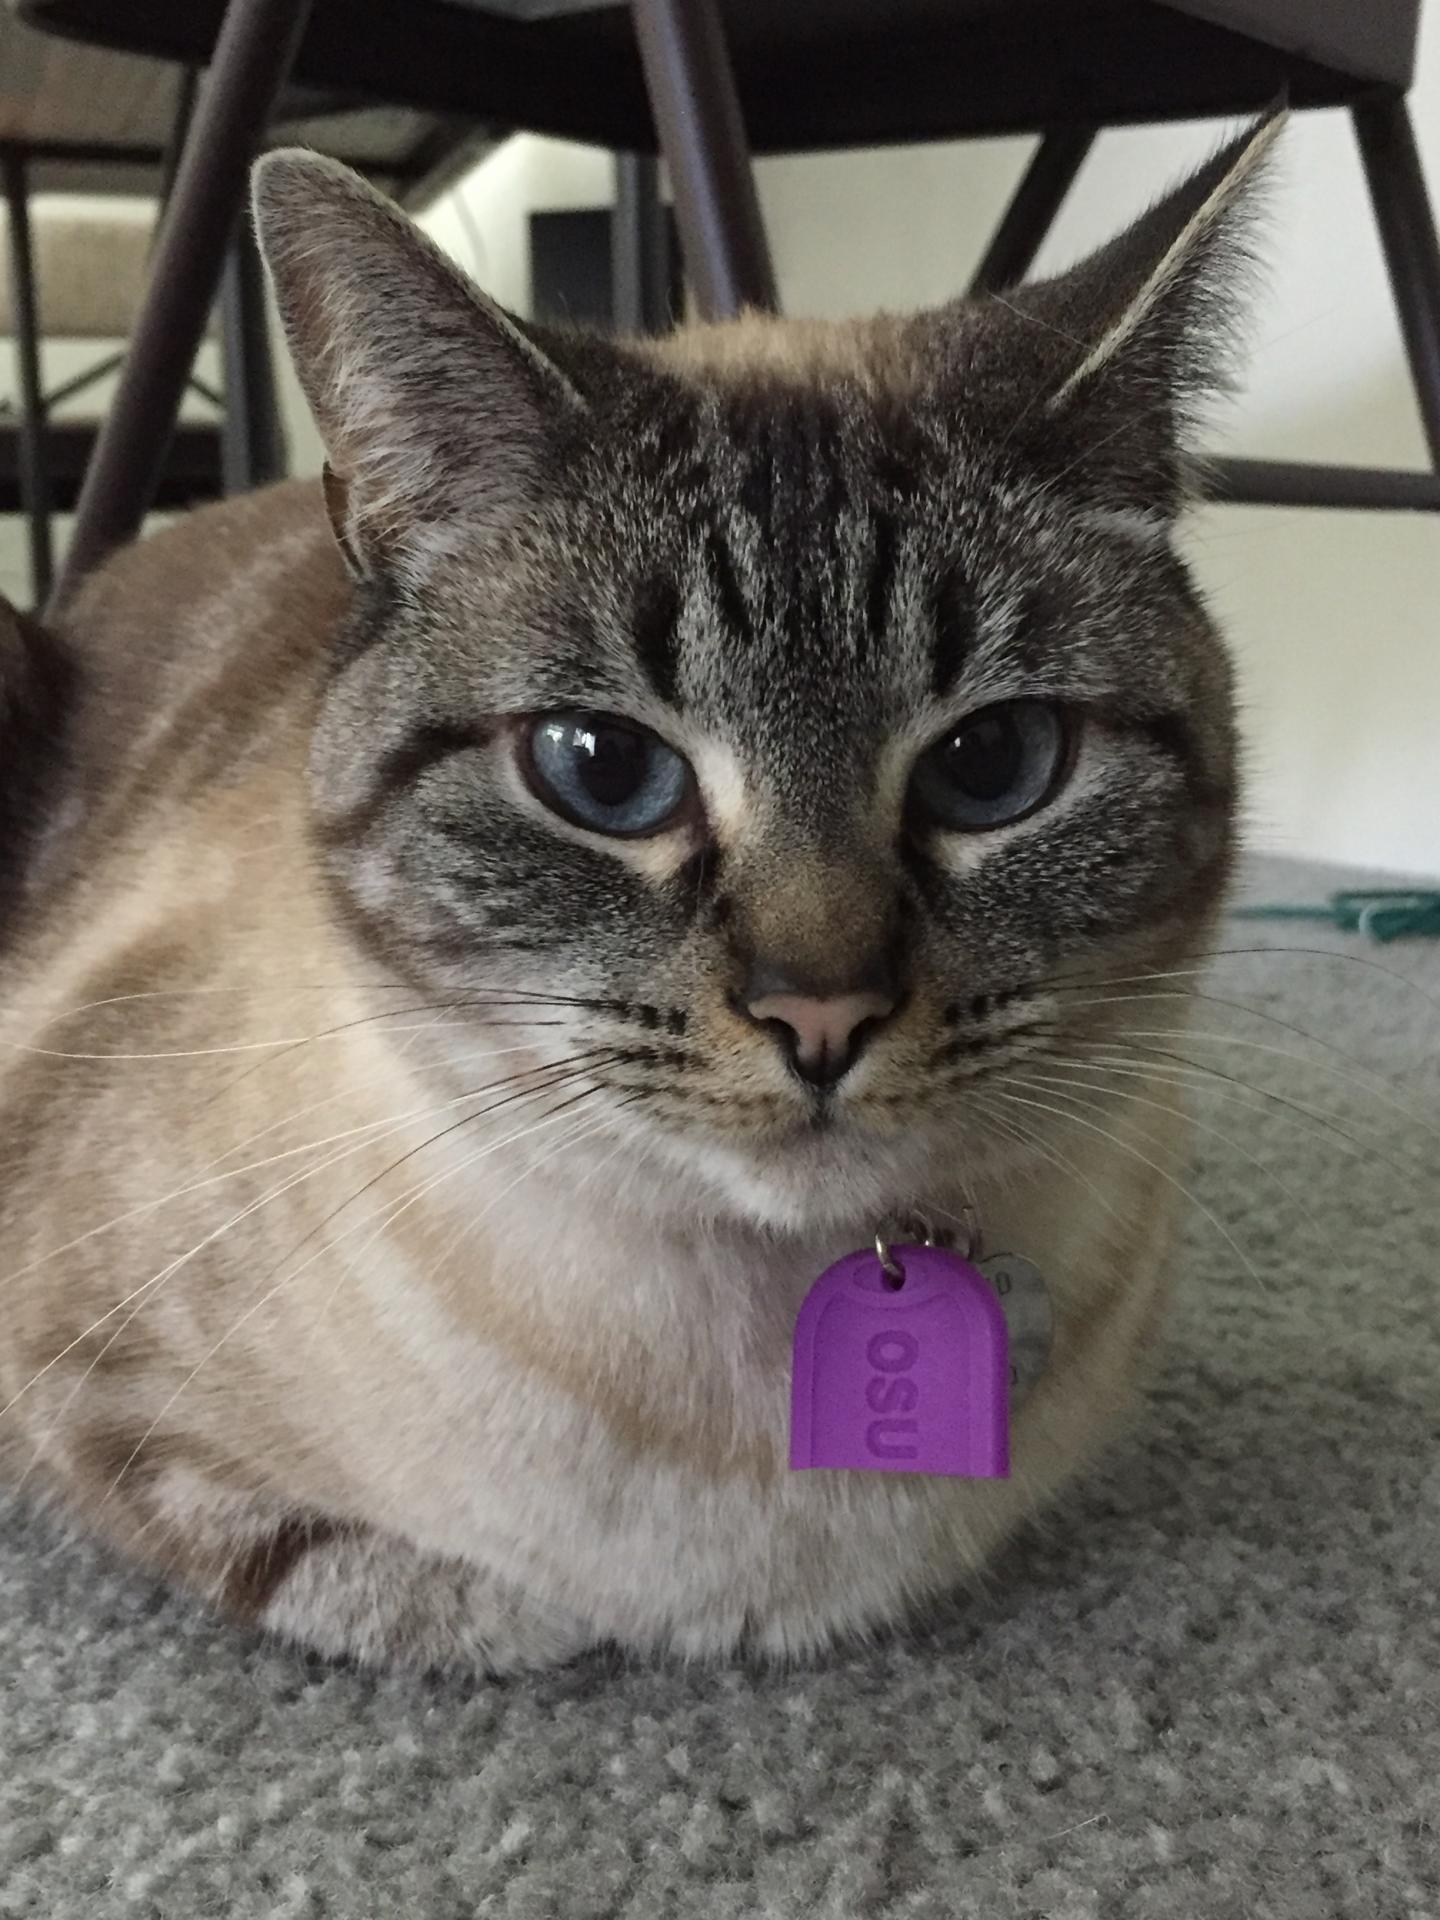 Pet Tags Link Widely Used Flame Retardant to Hyperthyroidism in Cats